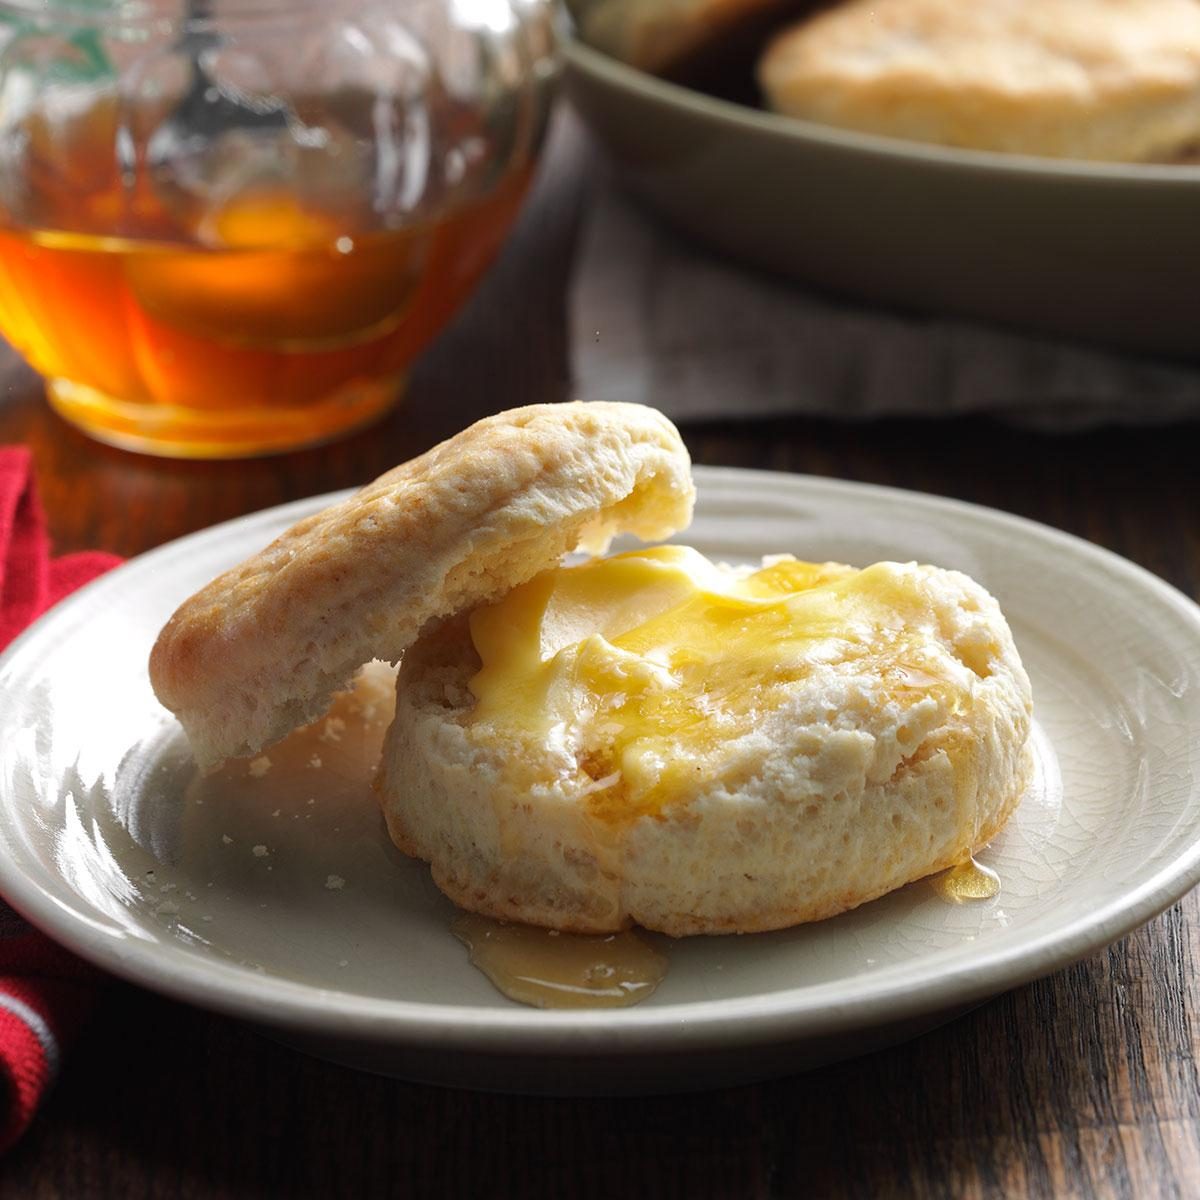 Feather-Light Biscuits is a Free Recipe by Eleanore Hill from Taste of Home!